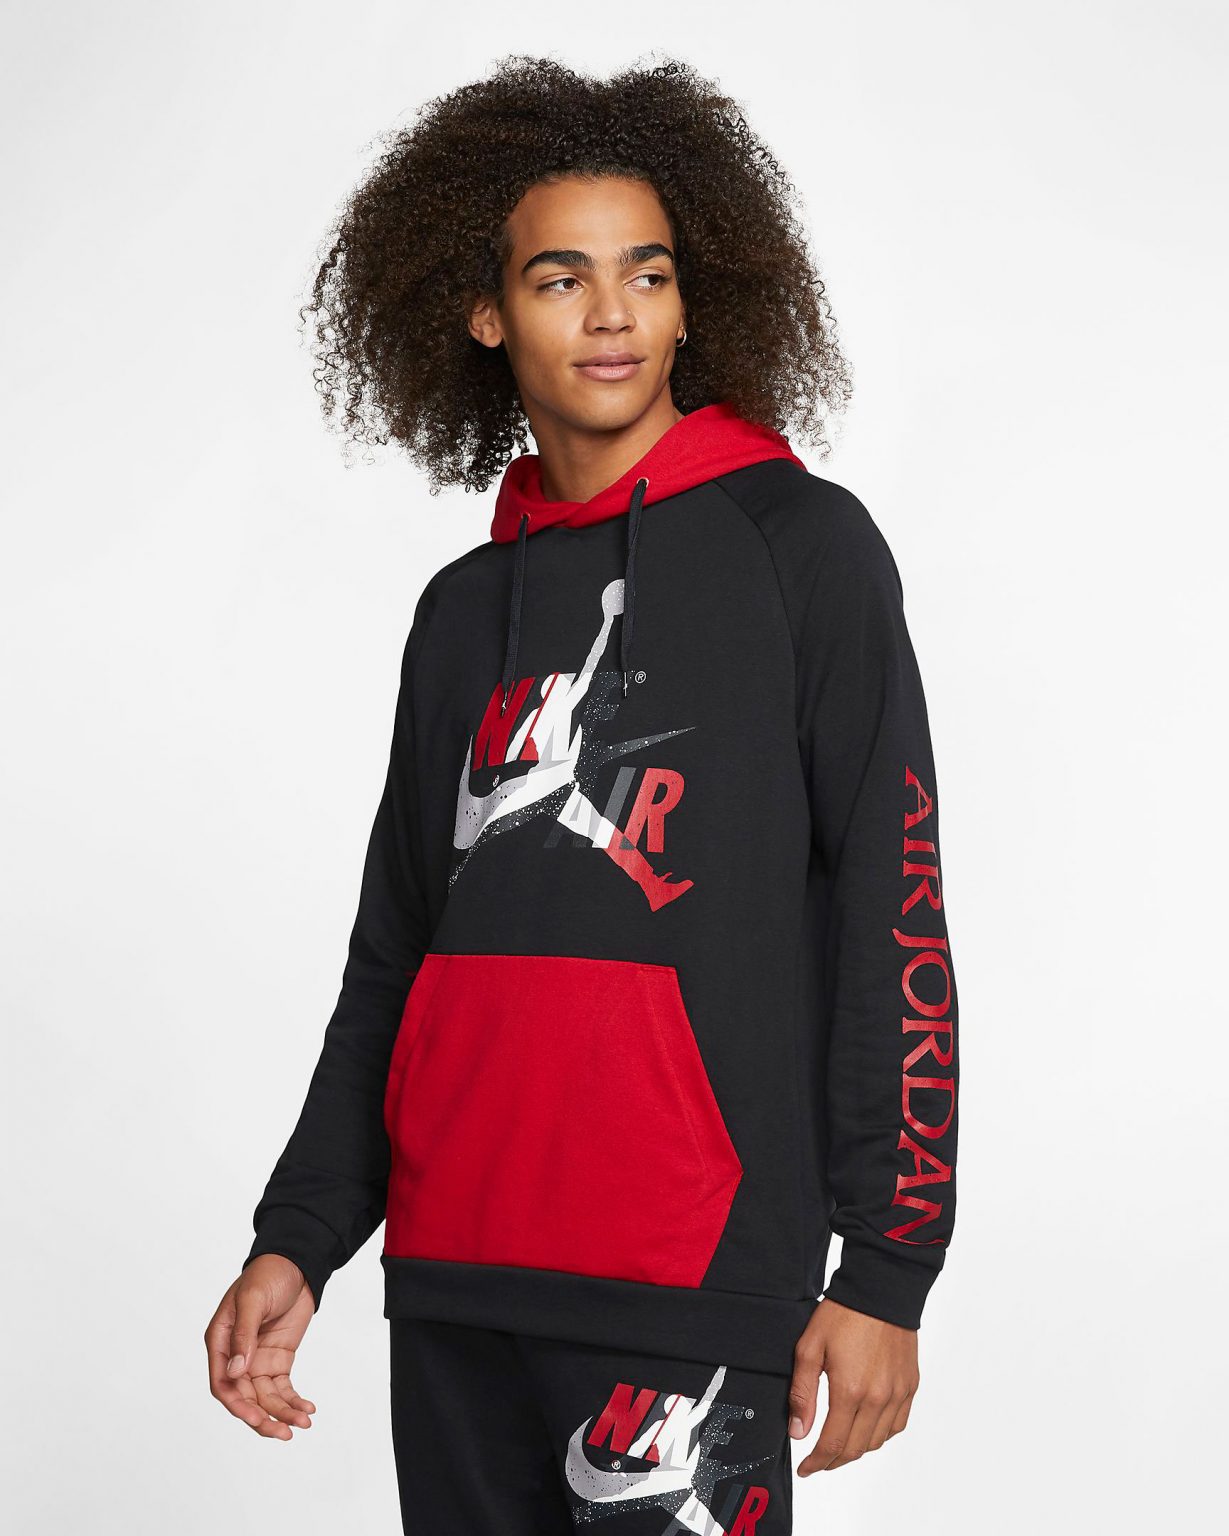 Air Jordan 3 Red Cement Clothing to Match | SneakerFits.com